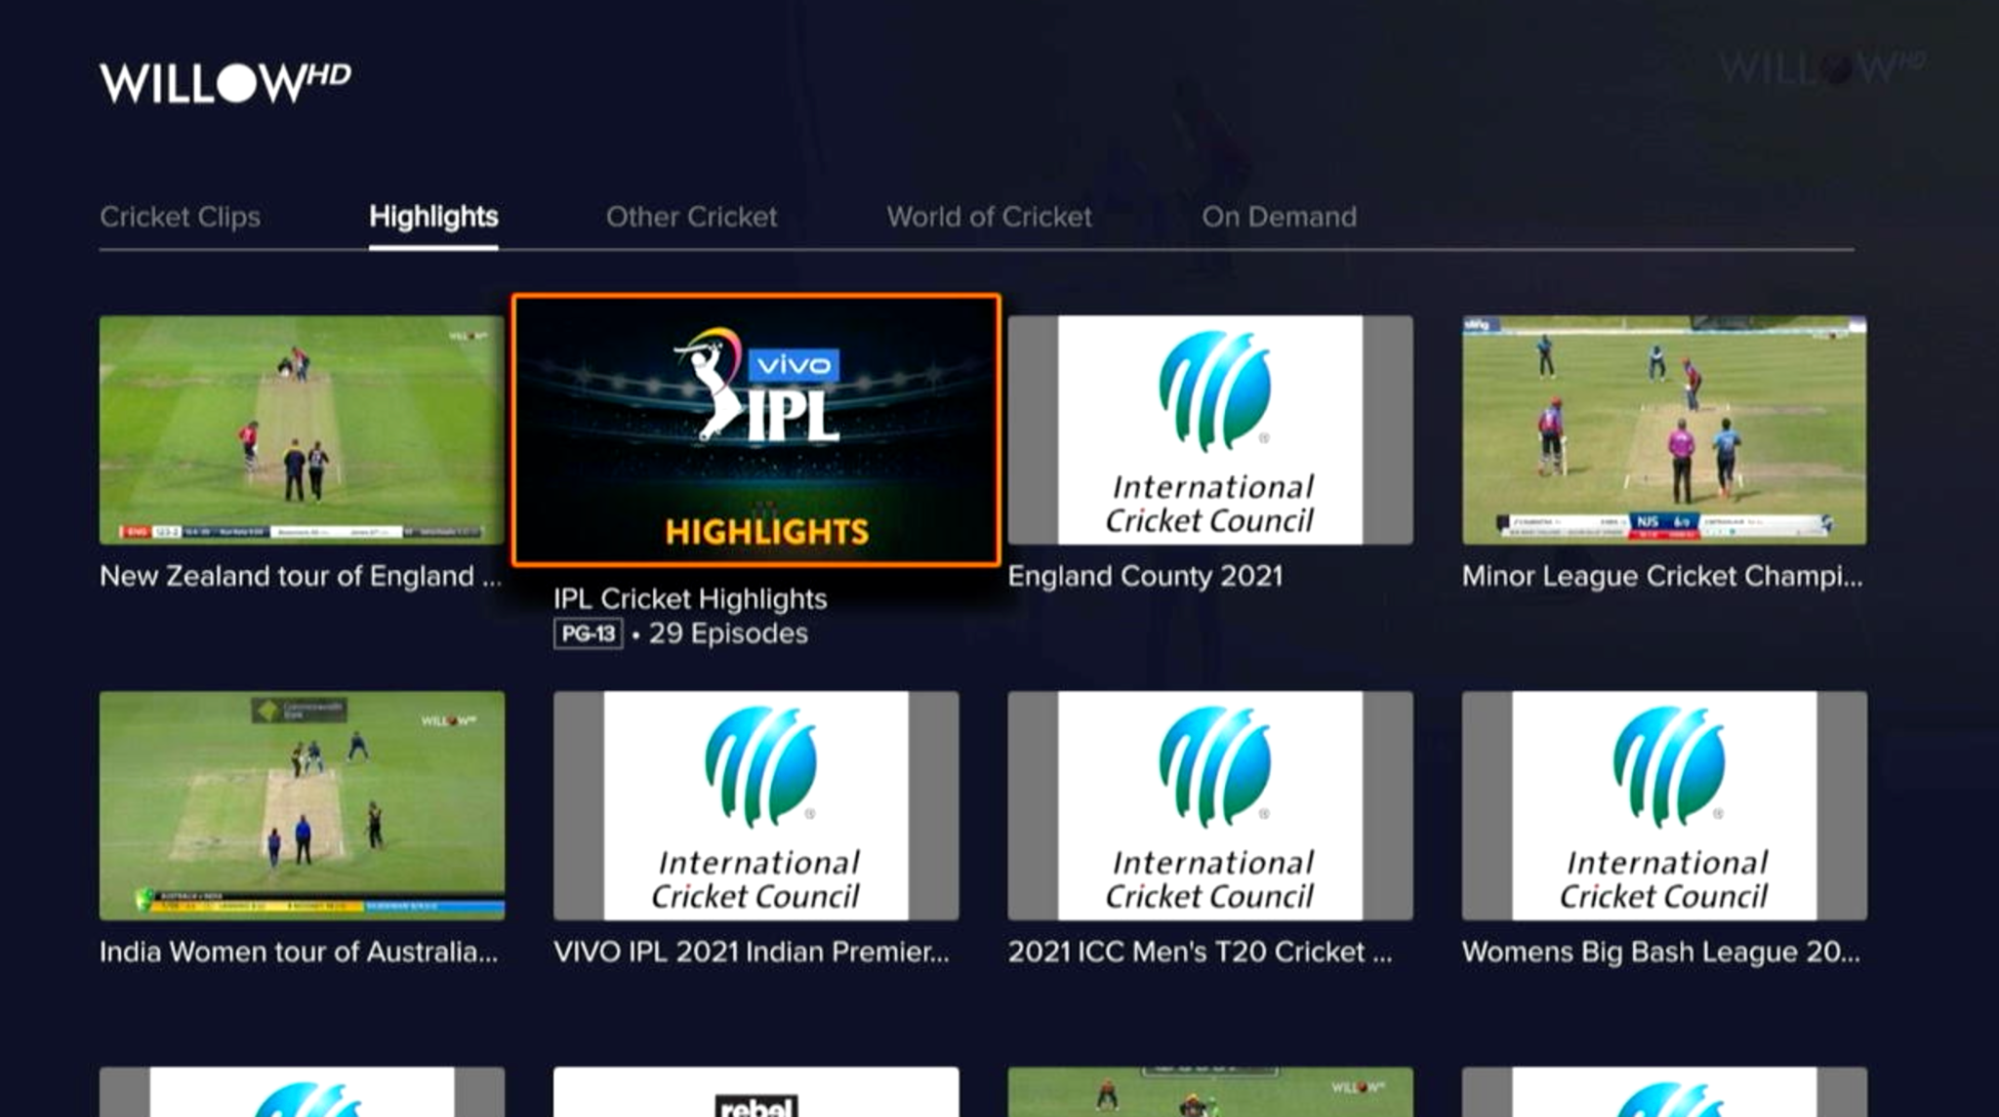 Cricket fan? Try Sling TV and re-watch the historic World Cup Finals The Independent